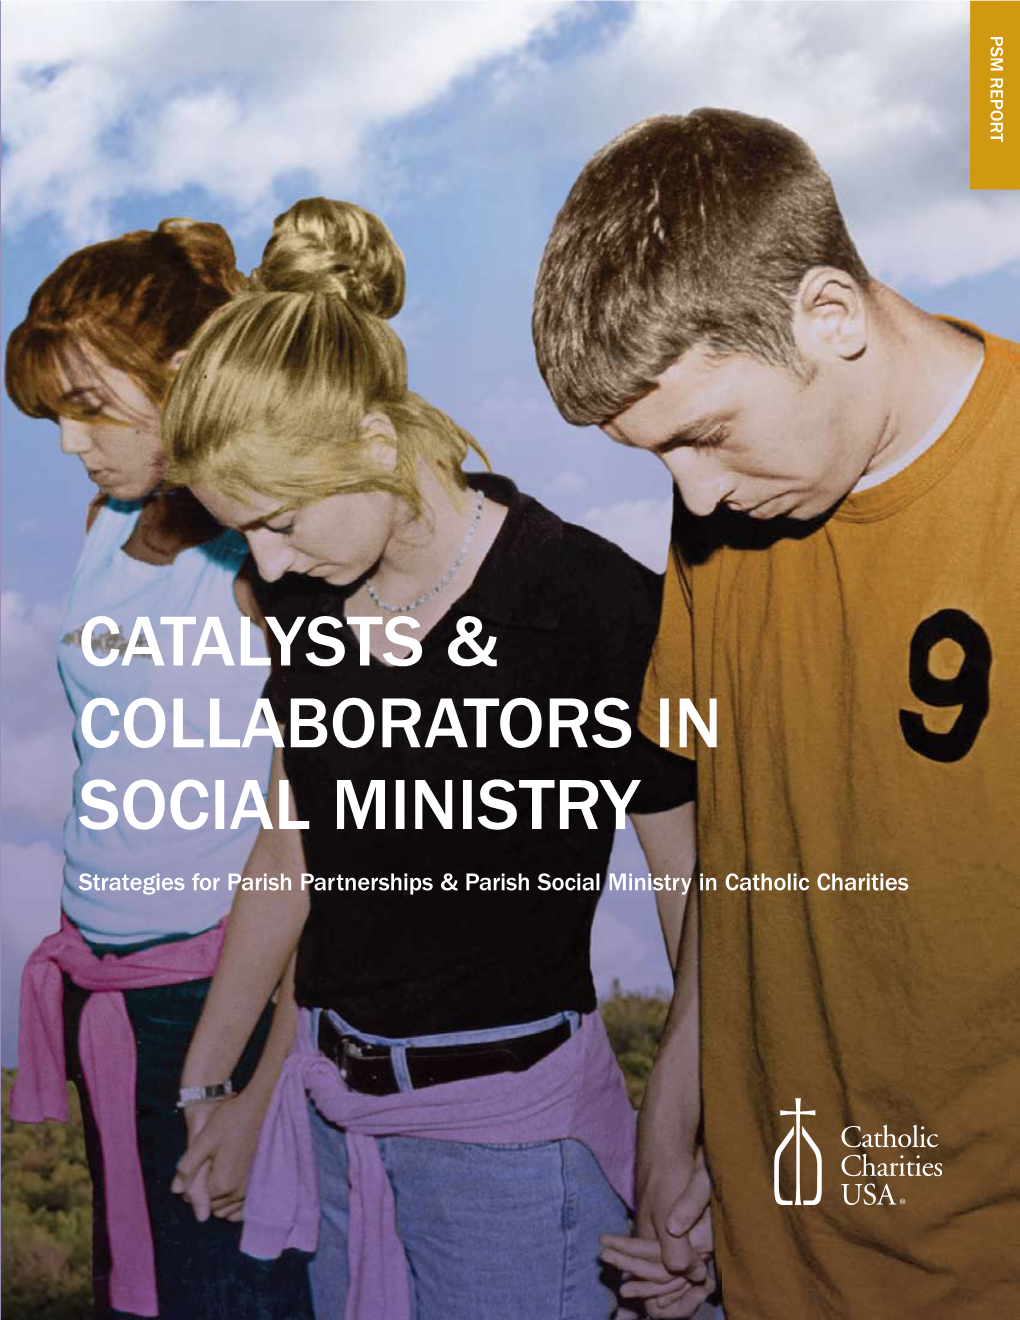 Catalysts & Collaborators in Social Ministry